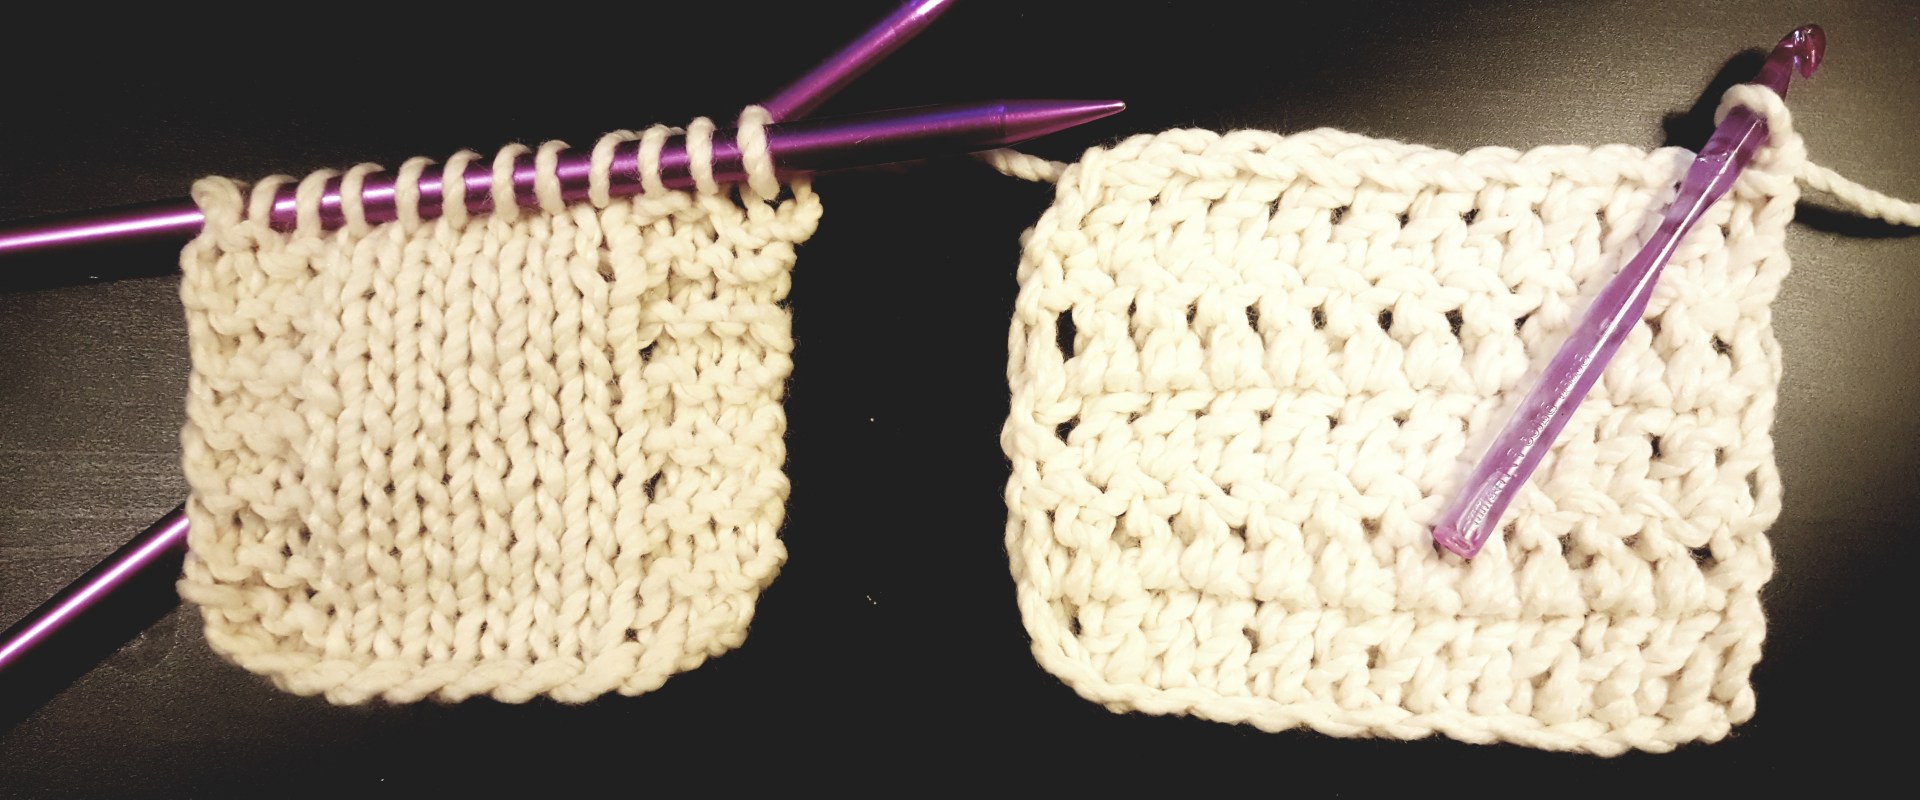 Knitting vs Crocheting: Which is Easier to Learn?